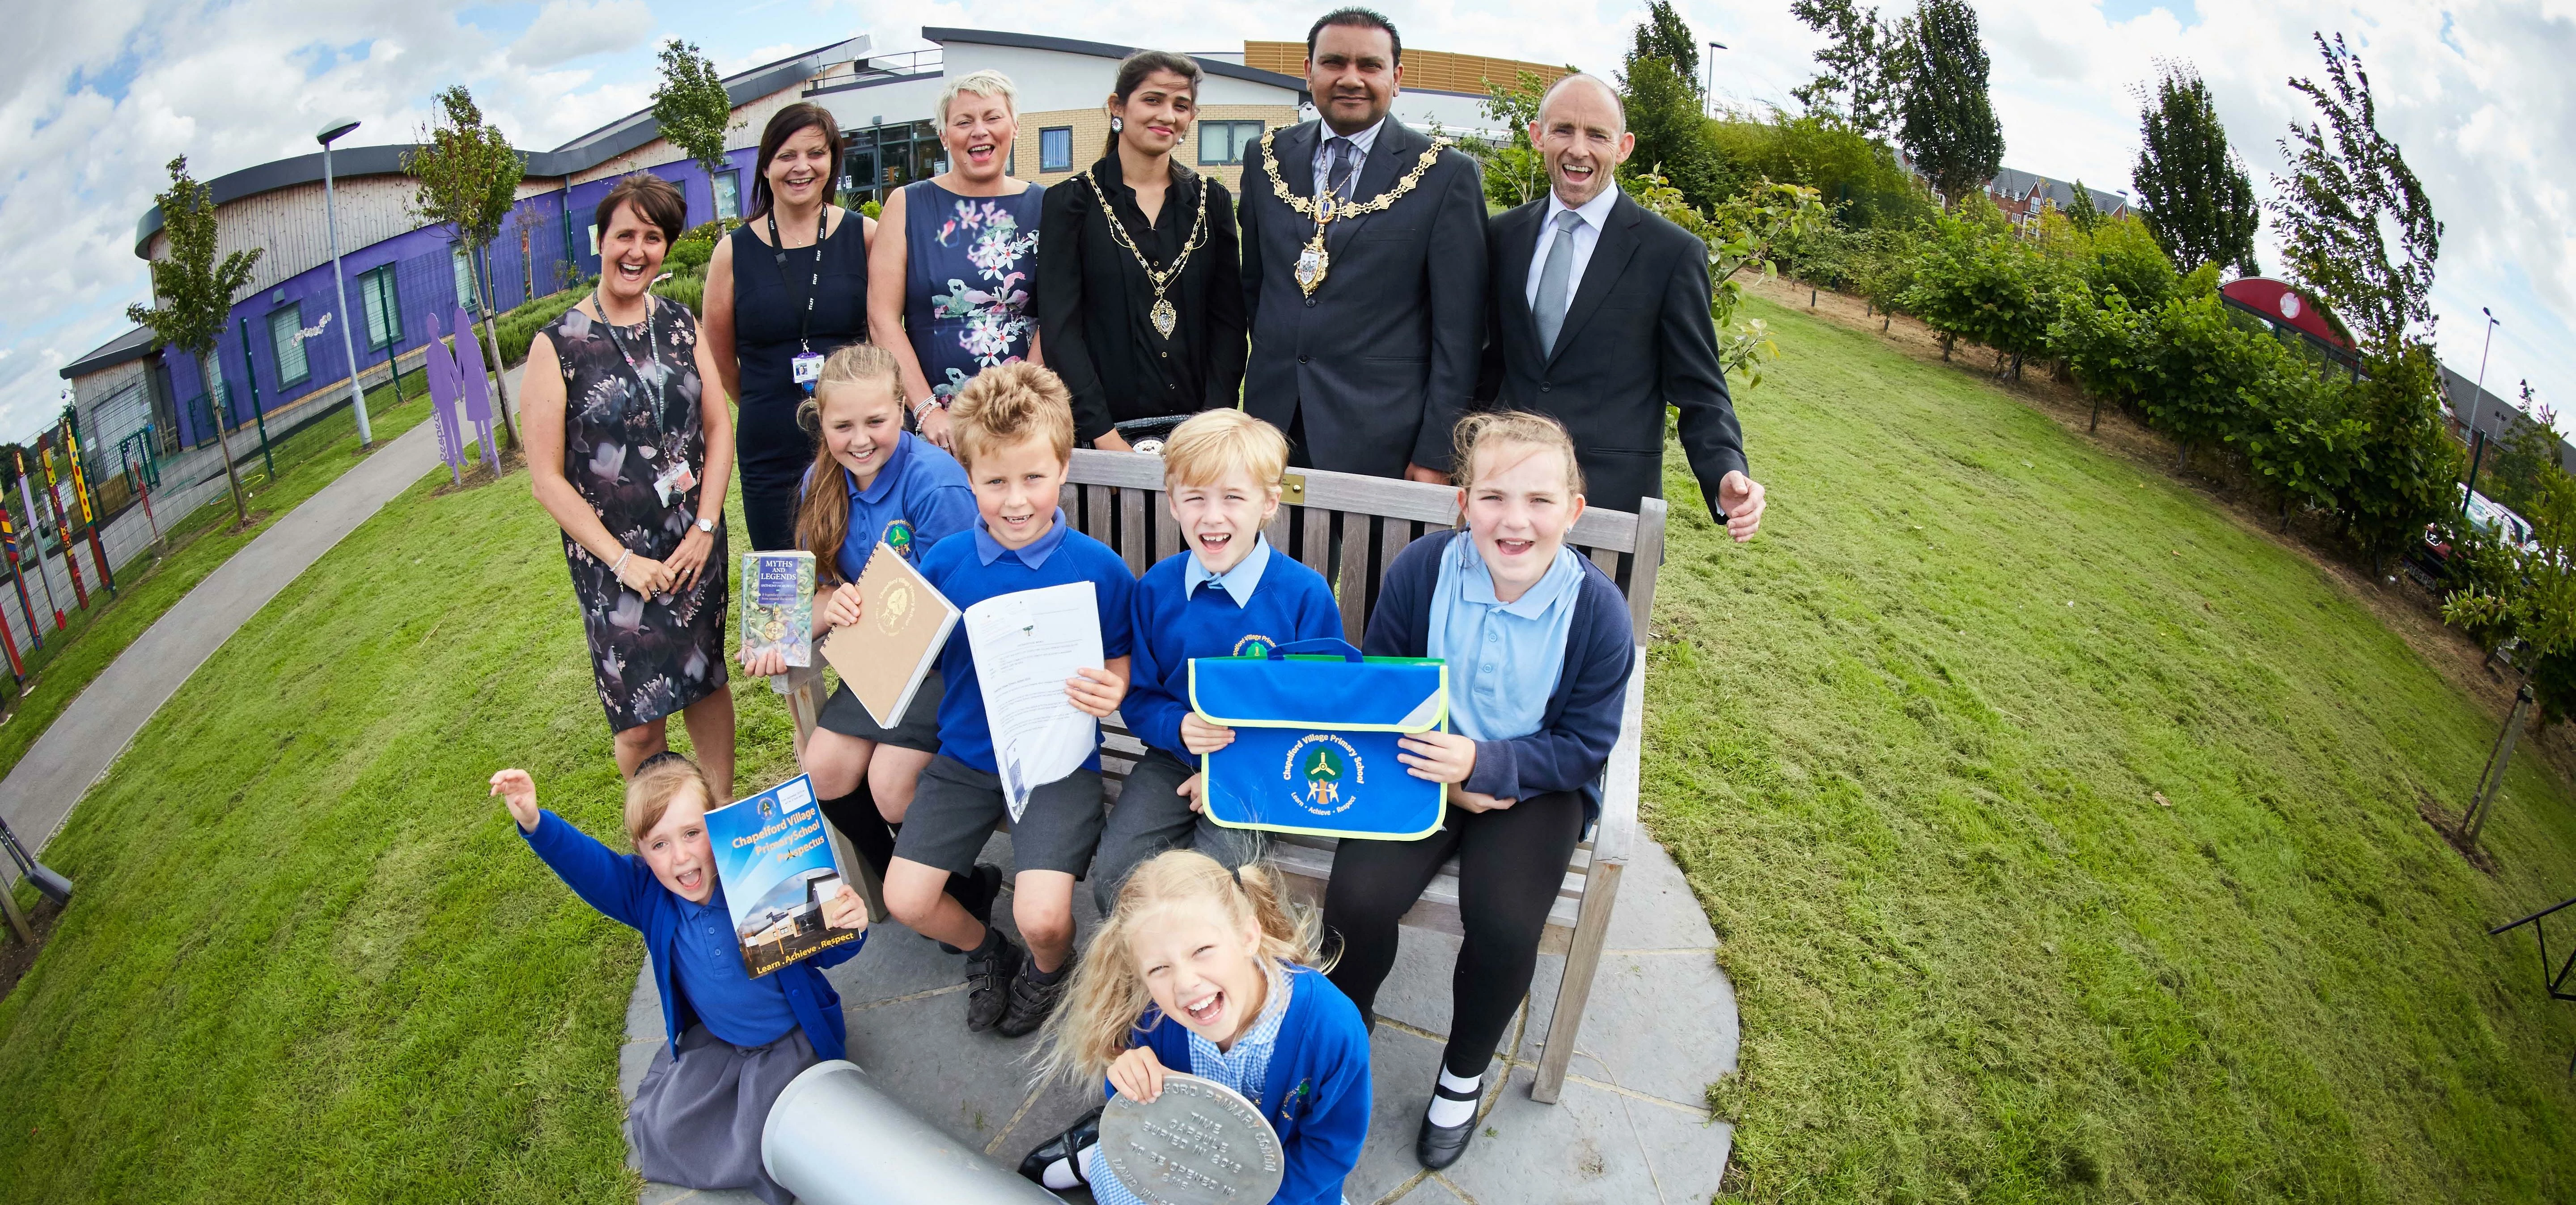 A time capsule was buried at Chapelford Primary School